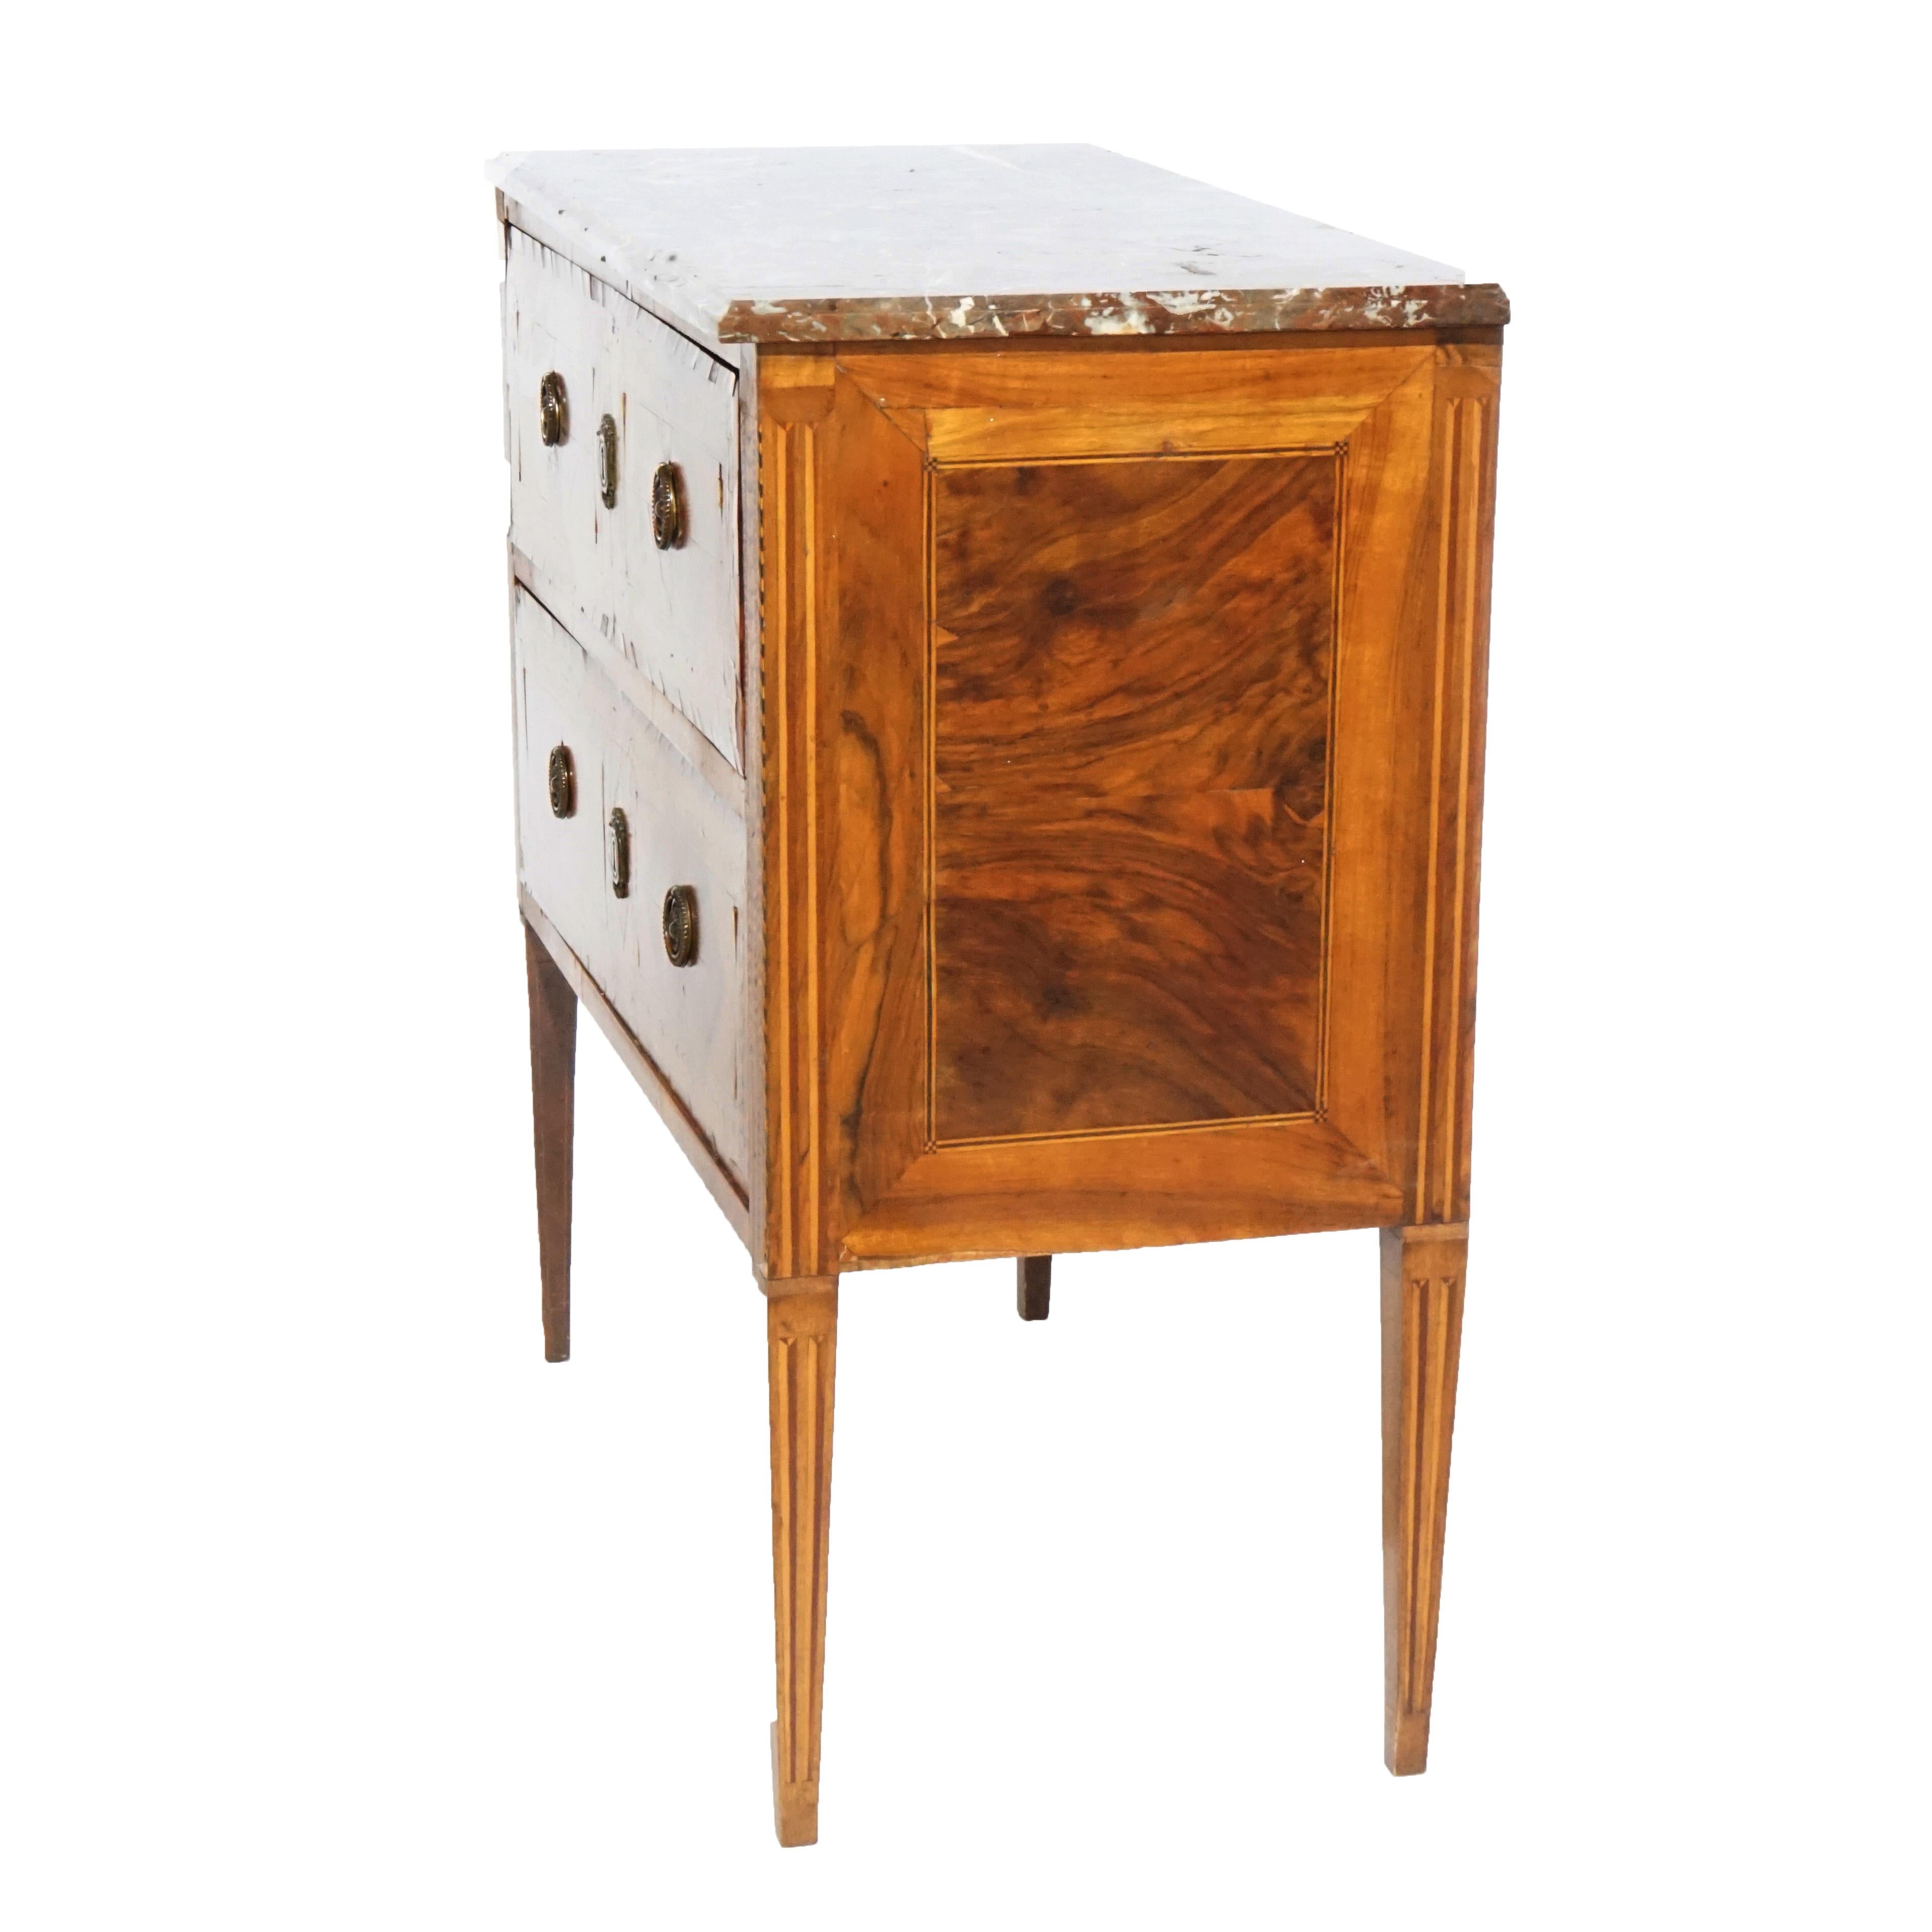 An early antique Italian commode offers specimen marble top over kingwood chest having two drawers, bookmatched facing, and satinwood inlaid banding; raised on square tapered legs, 18th century

Measures- 33.5''H x 33.5''W x 16.5''D.

*Ask about